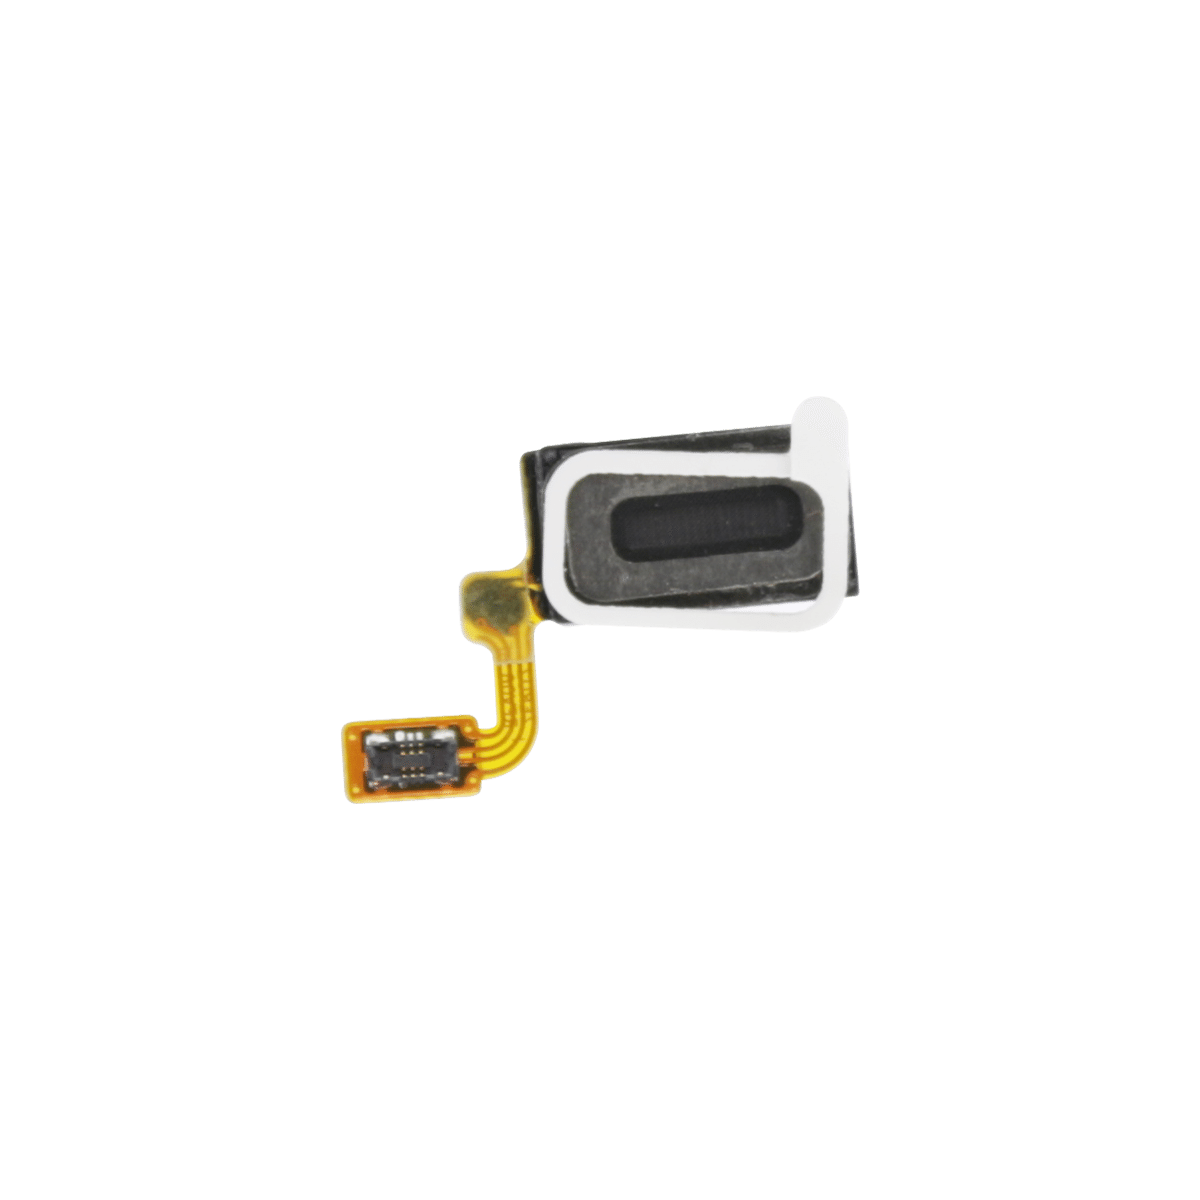 Samsung Galaxy S6 Edge+ Ear Speaker Flex Cable Replacement